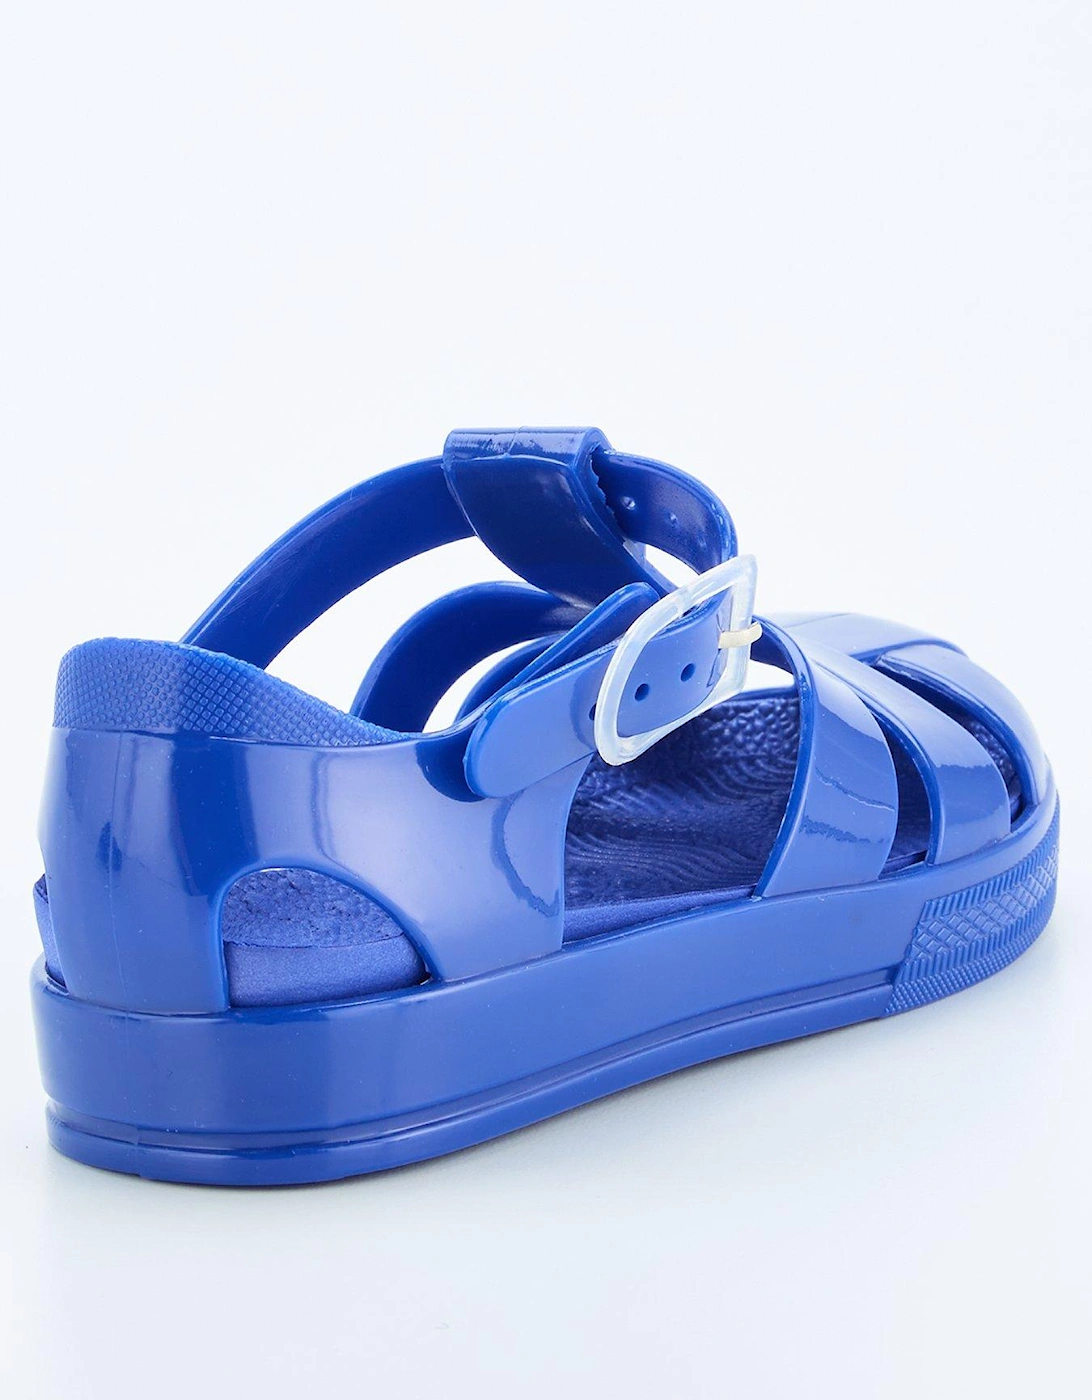 Boys Closed Toe Jelly Sandals - Blue